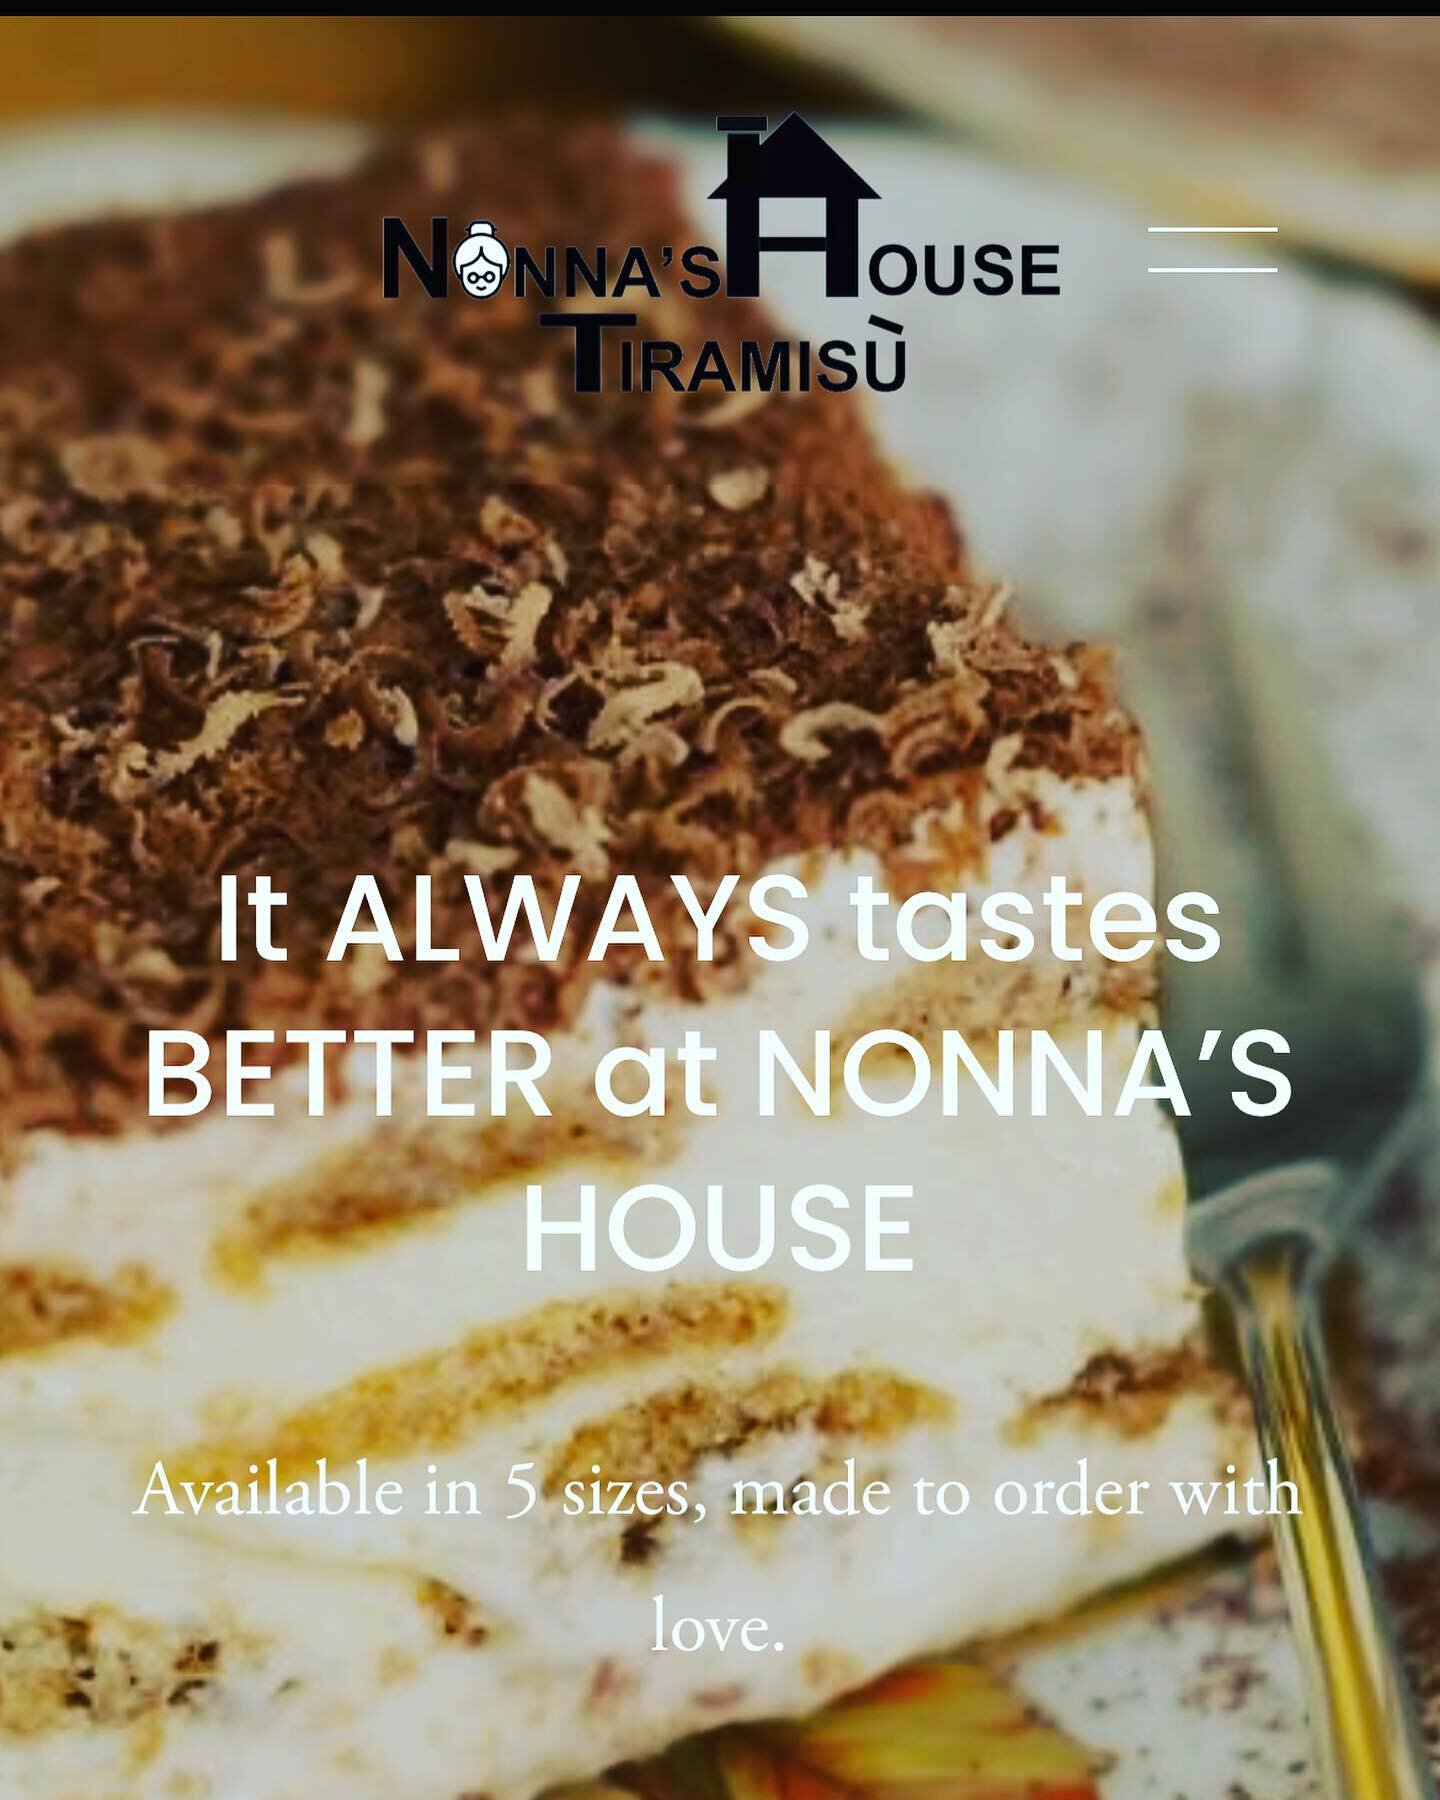 Website is up n running !!! Thanks @designrooster wouldn&rsquo;t be here without you 🙌🏽🙌🏽🙌🏽 To my family (esp Nonna lol) thanks for your help, guidance and most importantly LOVE&hellip;check out nonnashousetiramisu.com *you can pay online OR ca